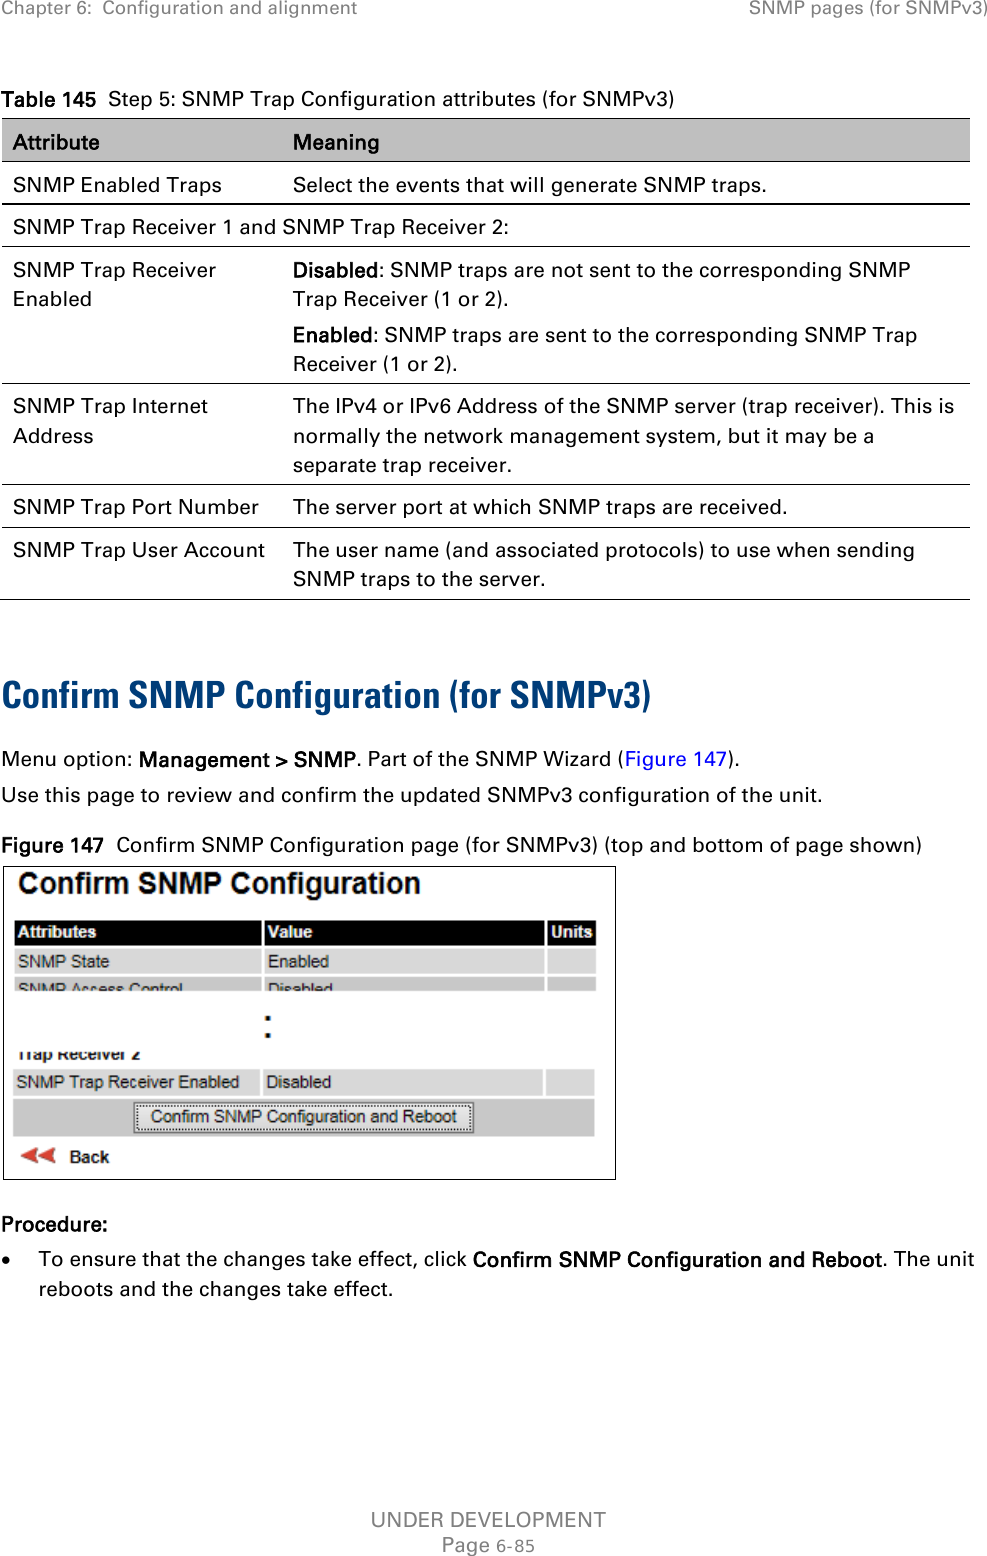 Chapter 6:  Configuration and alignment SNMP pages (for SNMPv3)  Table 145  Step 5: SNMP Trap Configuration attributes (for SNMPv3) Attribute Meaning SNMP Enabled Traps Select the events that will generate SNMP traps. SNMP Trap Receiver 1 and SNMP Trap Receiver 2: SNMP Trap Receiver Enabled Disabled: SNMP traps are not sent to the corresponding SNMP Trap Receiver (1 or 2). Enabled: SNMP traps are sent to the corresponding SNMP Trap Receiver (1 or 2). SNMP Trap Internet Address The IPv4 or IPv6 Address of the SNMP server (trap receiver). This is normally the network management system, but it may be a separate trap receiver. SNMP Trap Port Number The server port at which SNMP traps are received. SNMP Trap User Account The user name (and associated protocols) to use when sending SNMP traps to the server.  Confirm SNMP Configuration (for SNMPv3)  Menu option: Management &gt; SNMP. Part of the SNMP Wizard (Figure 147). Use this page to review and confirm the updated SNMPv3 configuration of the unit. Figure 147  Confirm SNMP Configuration page (for SNMPv3) (top and bottom of page shown)  Procedure: • To ensure that the changes take effect, click Confirm SNMP Configuration and Reboot. The unit reboots and the changes take effect. UNDER DEVELOPMENT Page 6-85 